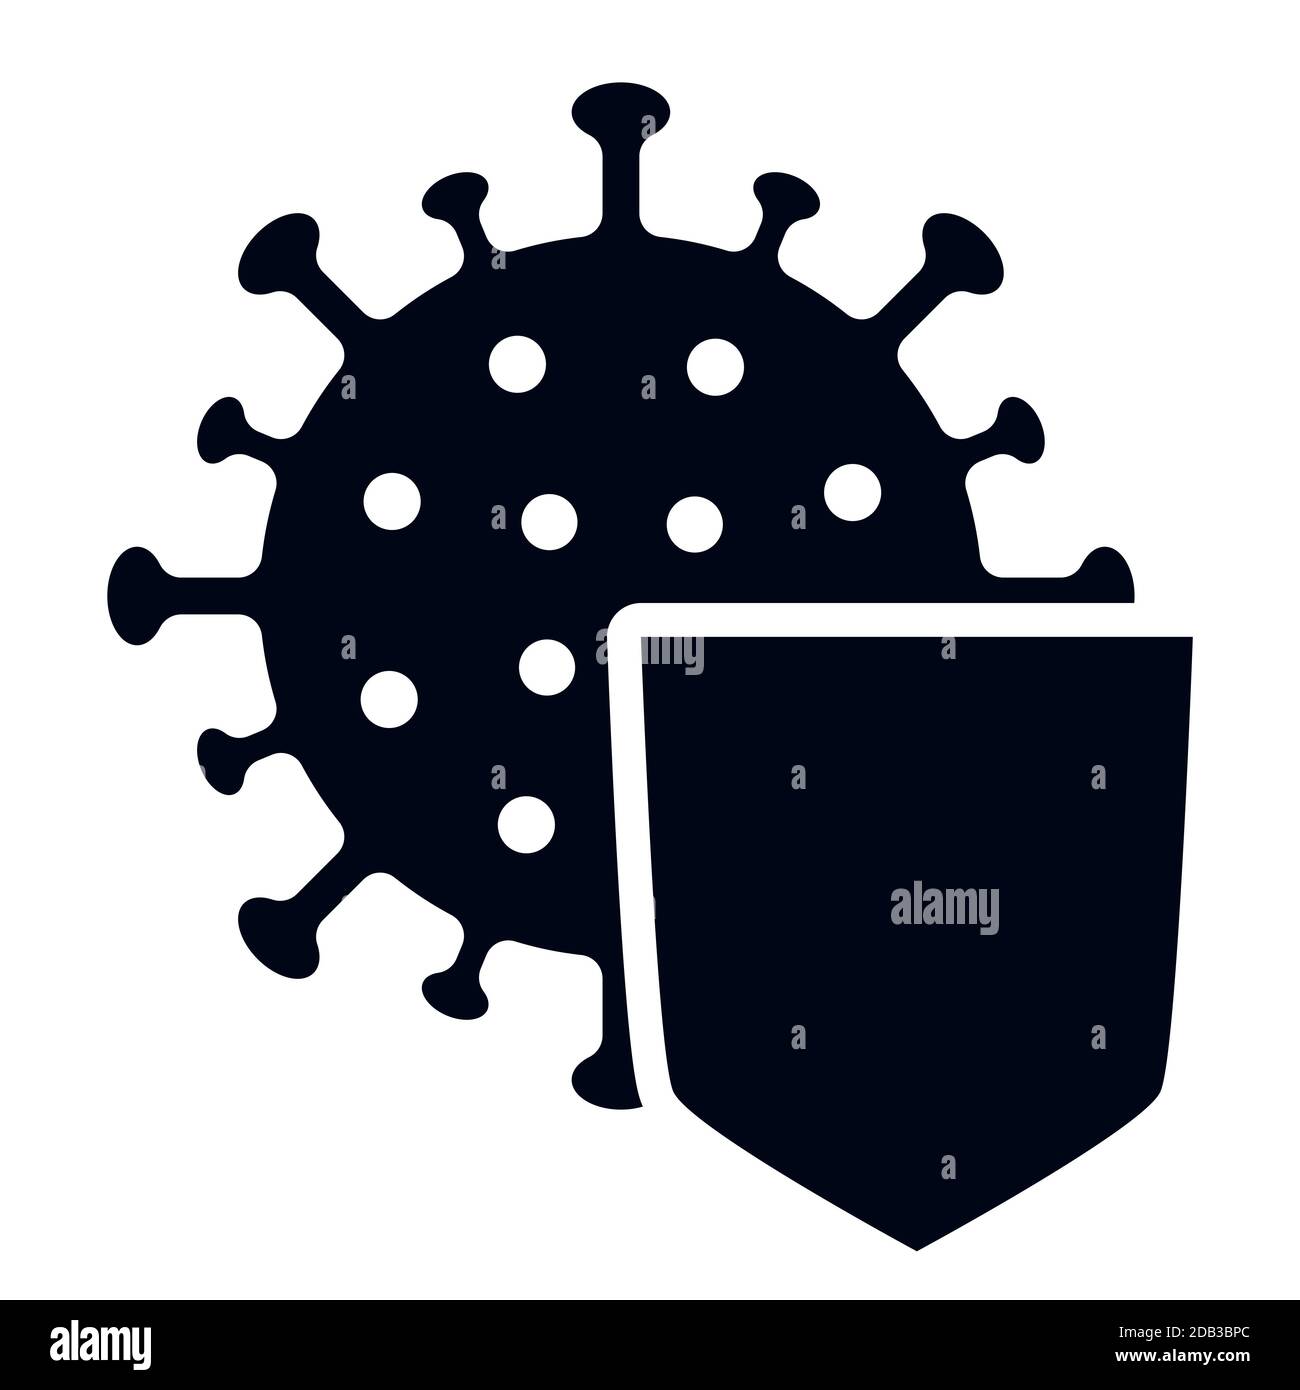 Corona virus with protection shield vector illustration icon. Symbol for protection and resistance Stock Vector